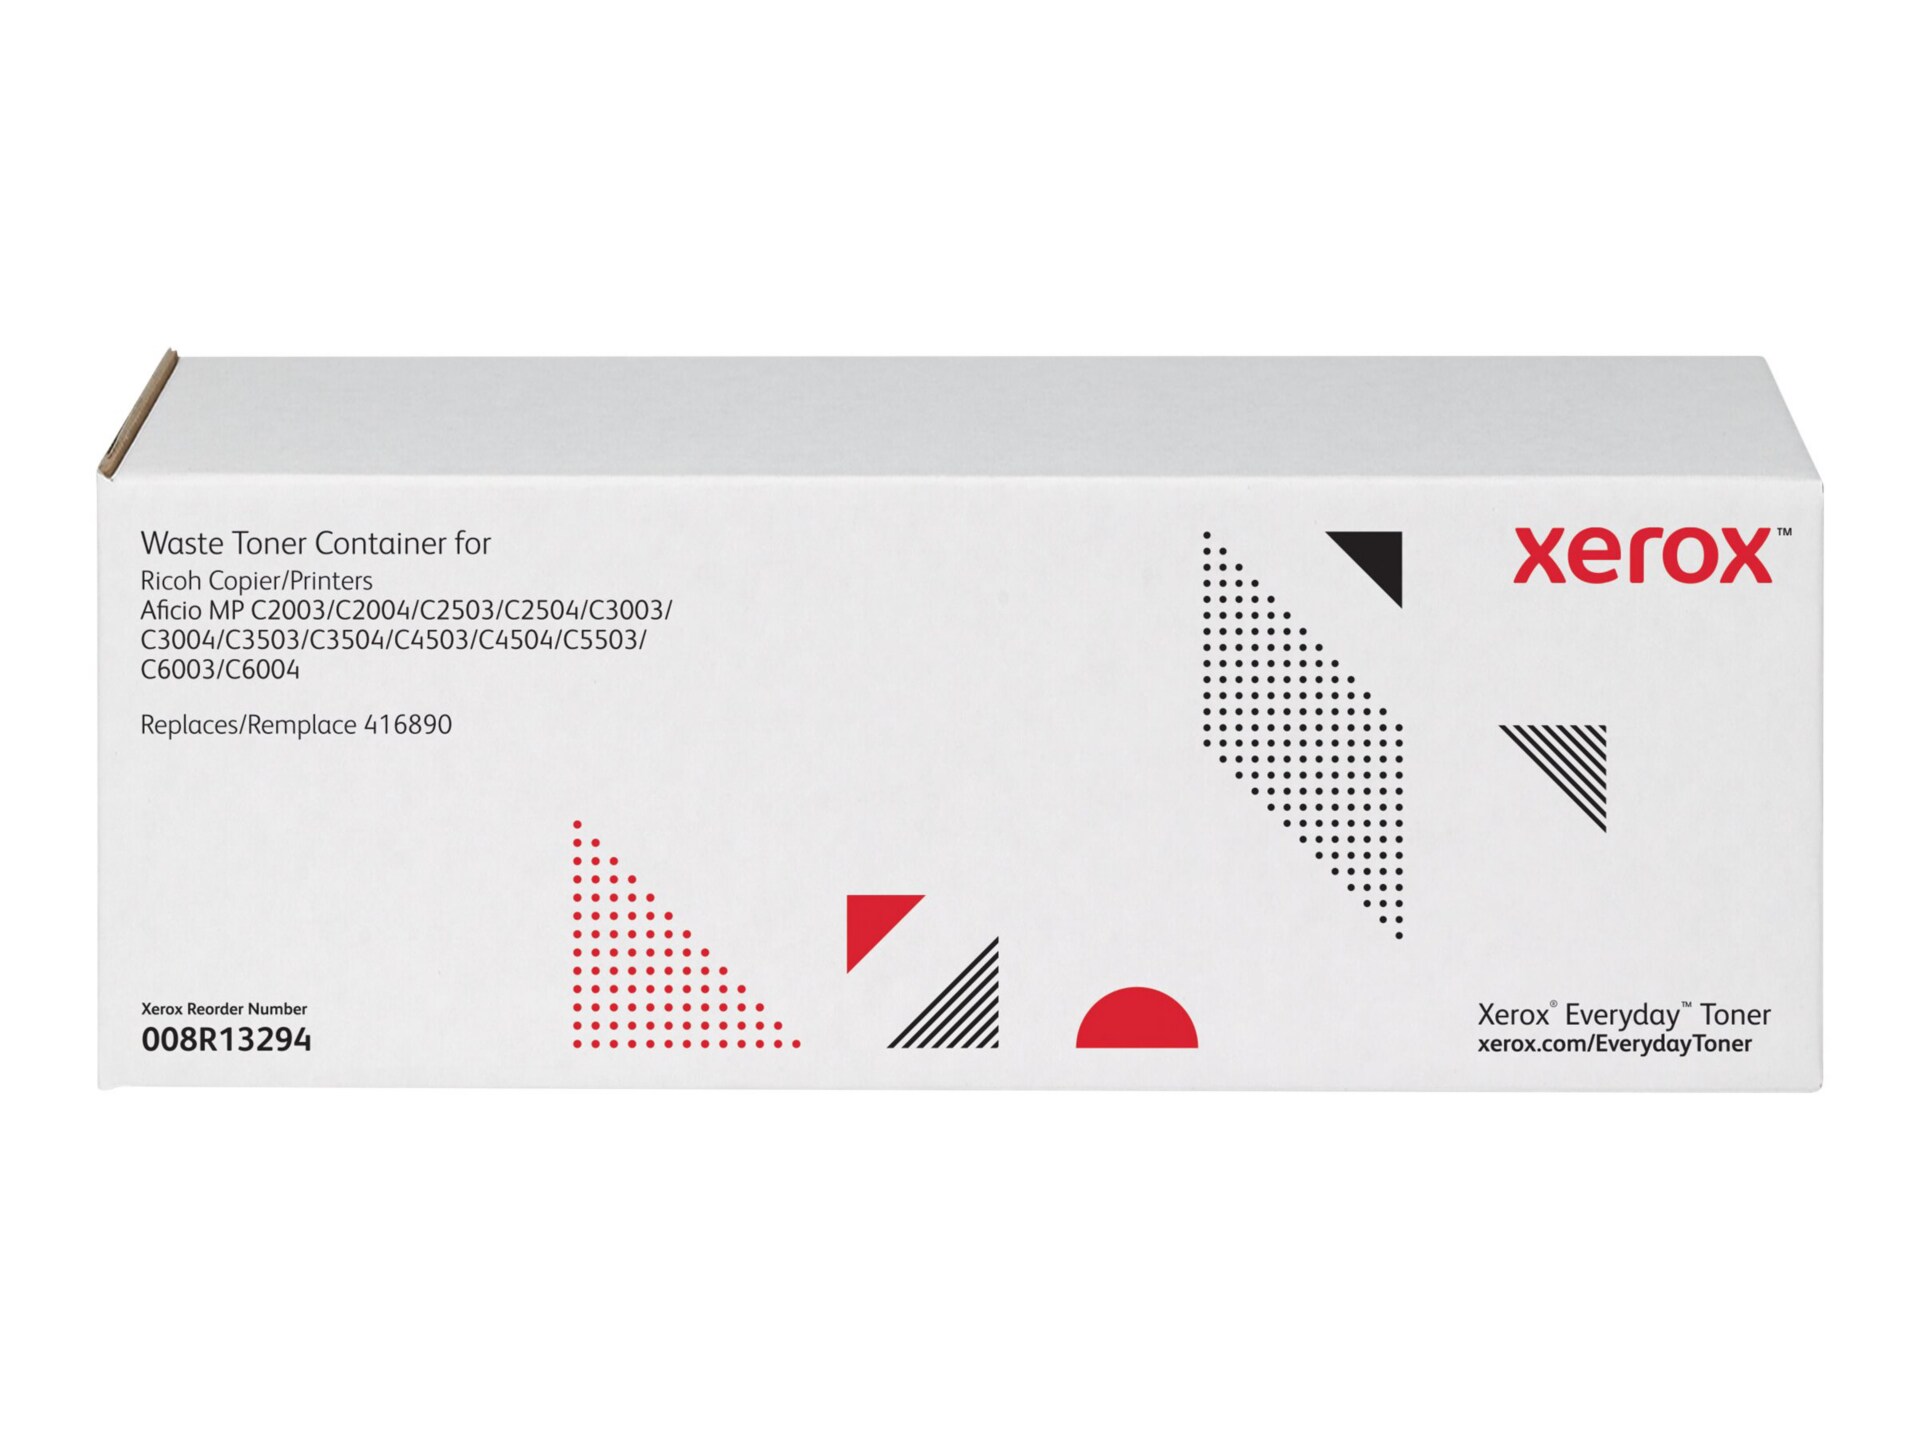 Xerox Everyday Waste Toner Cartridge, replacement for Ricoh 416890